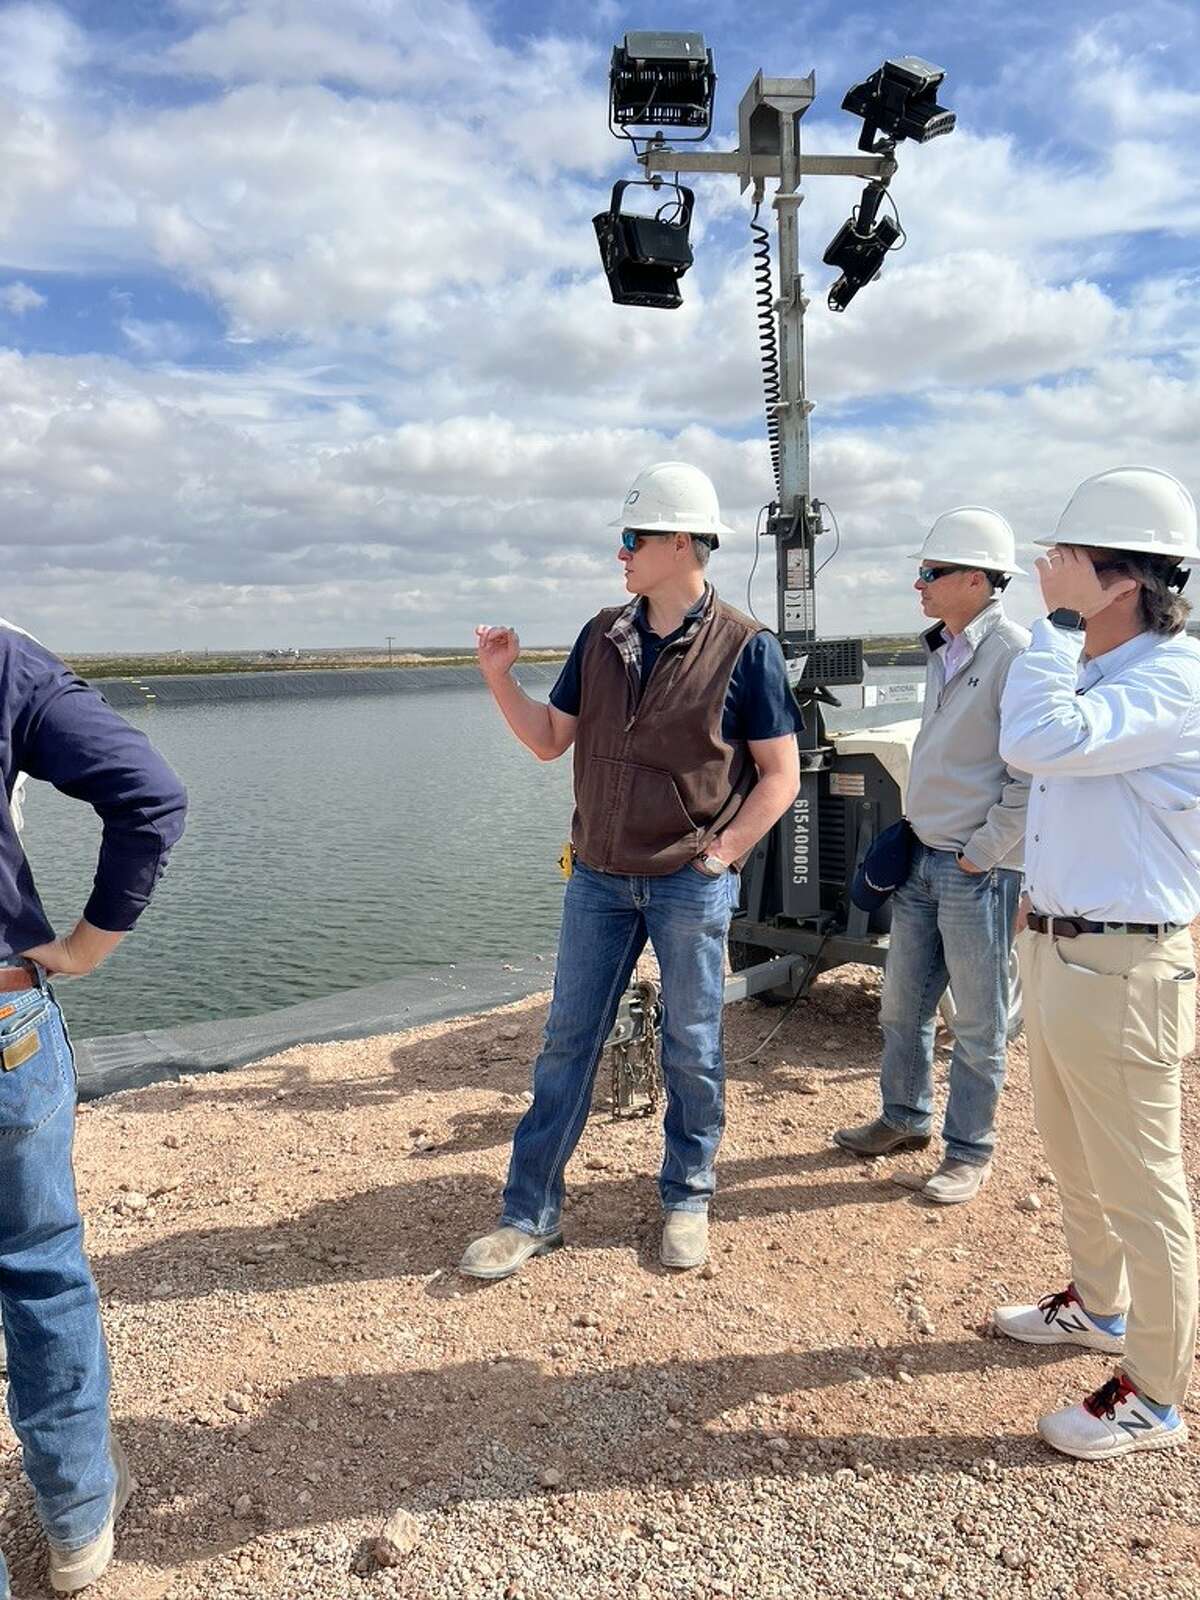 Infinity Water Solutions President and Chief Financial Officer Chris Caudill inspects the company's Mills Ranch facility in Eddy County, New Mexico.